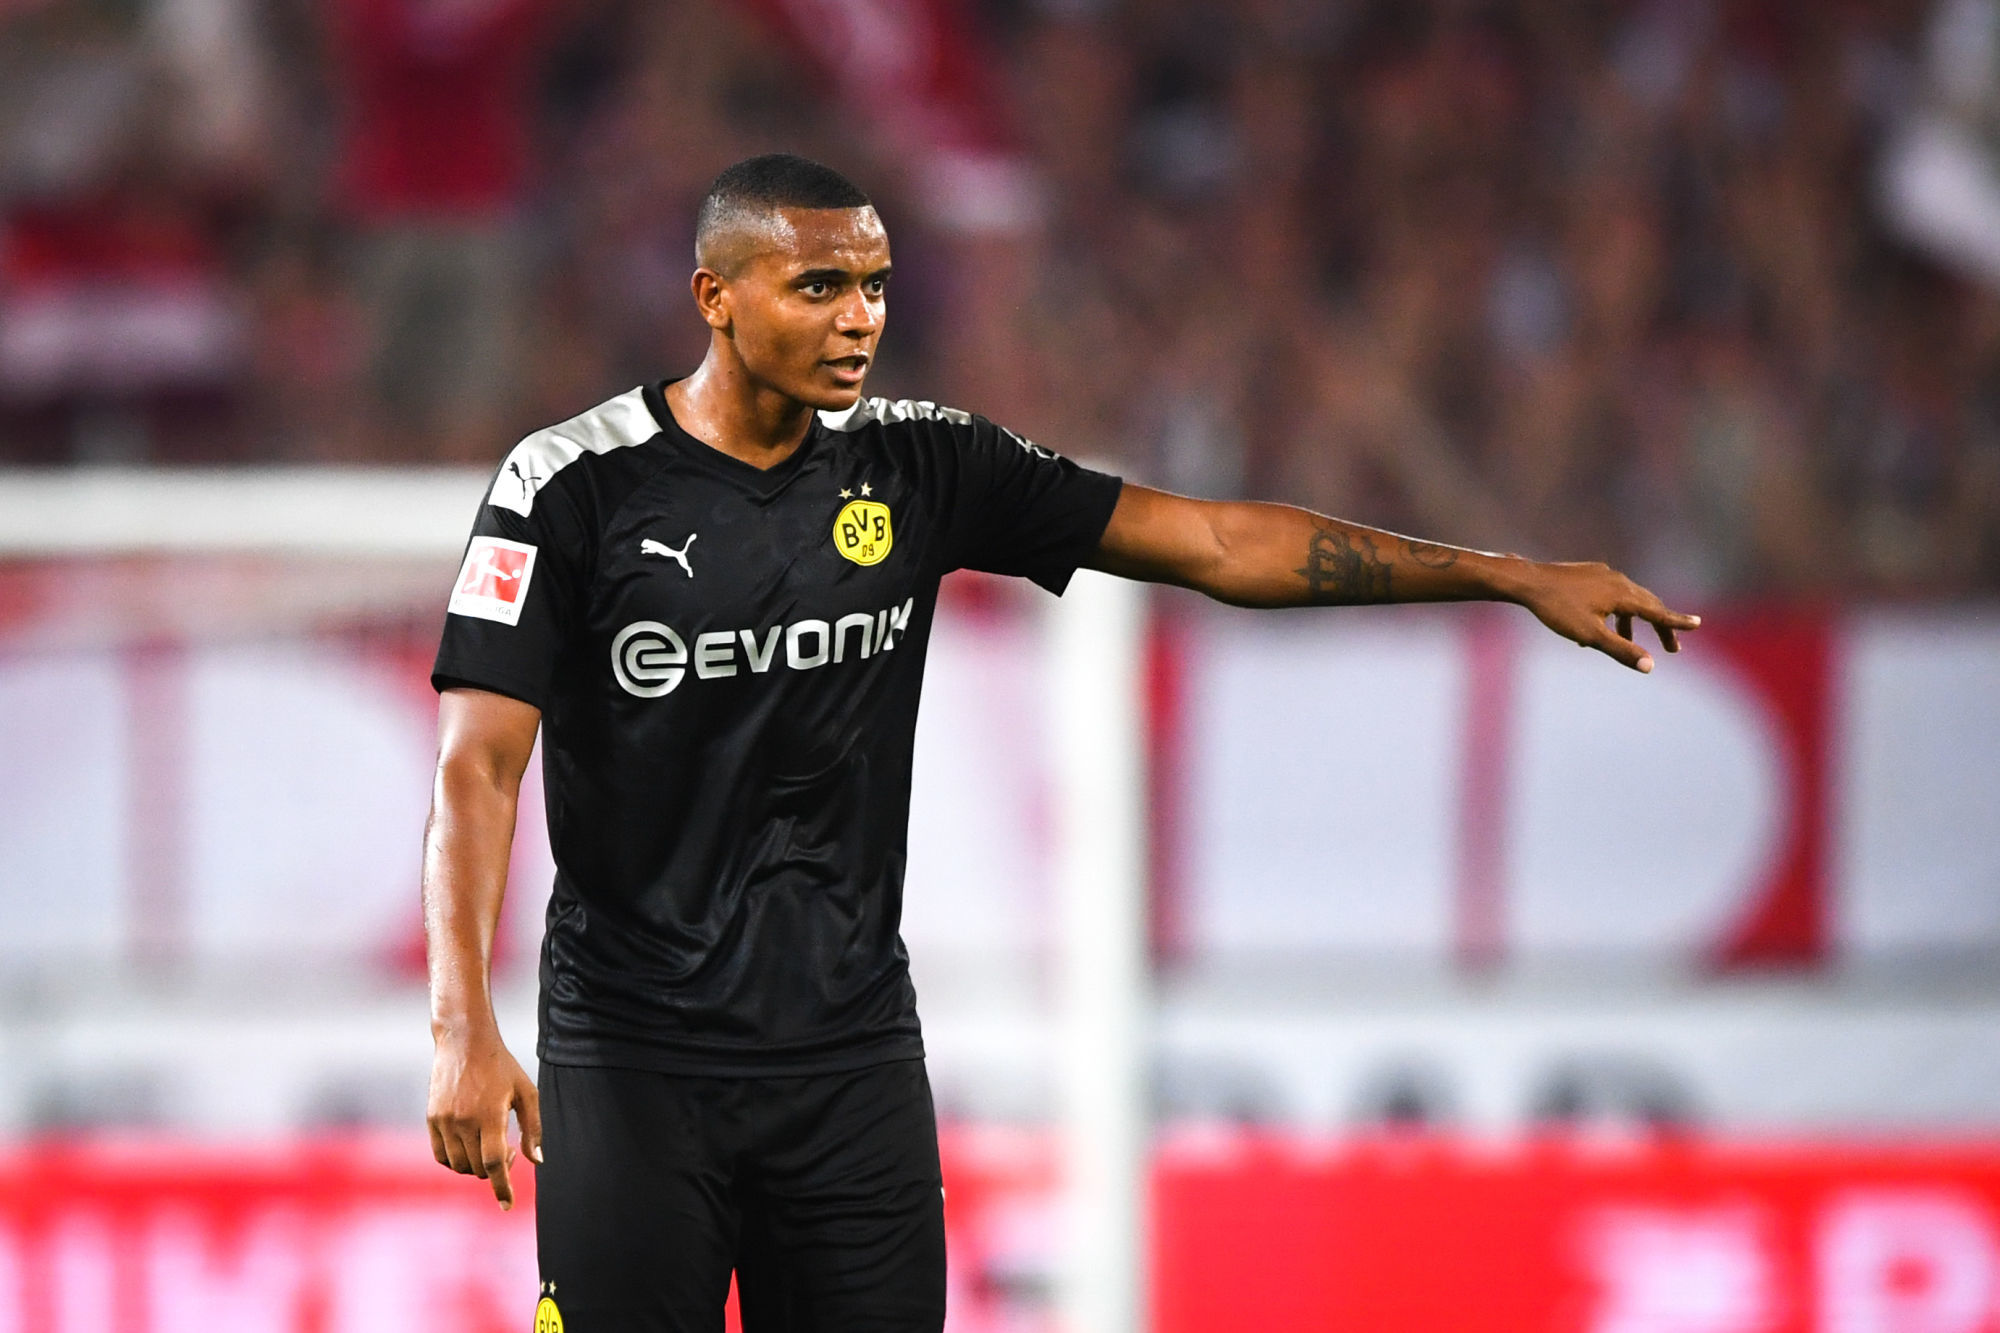 Manuel Akanji during the Bundesliga match between Cologne and Borussia Dortmund on 23th August 2019
Photo : PictureAlliance / Icon Sport